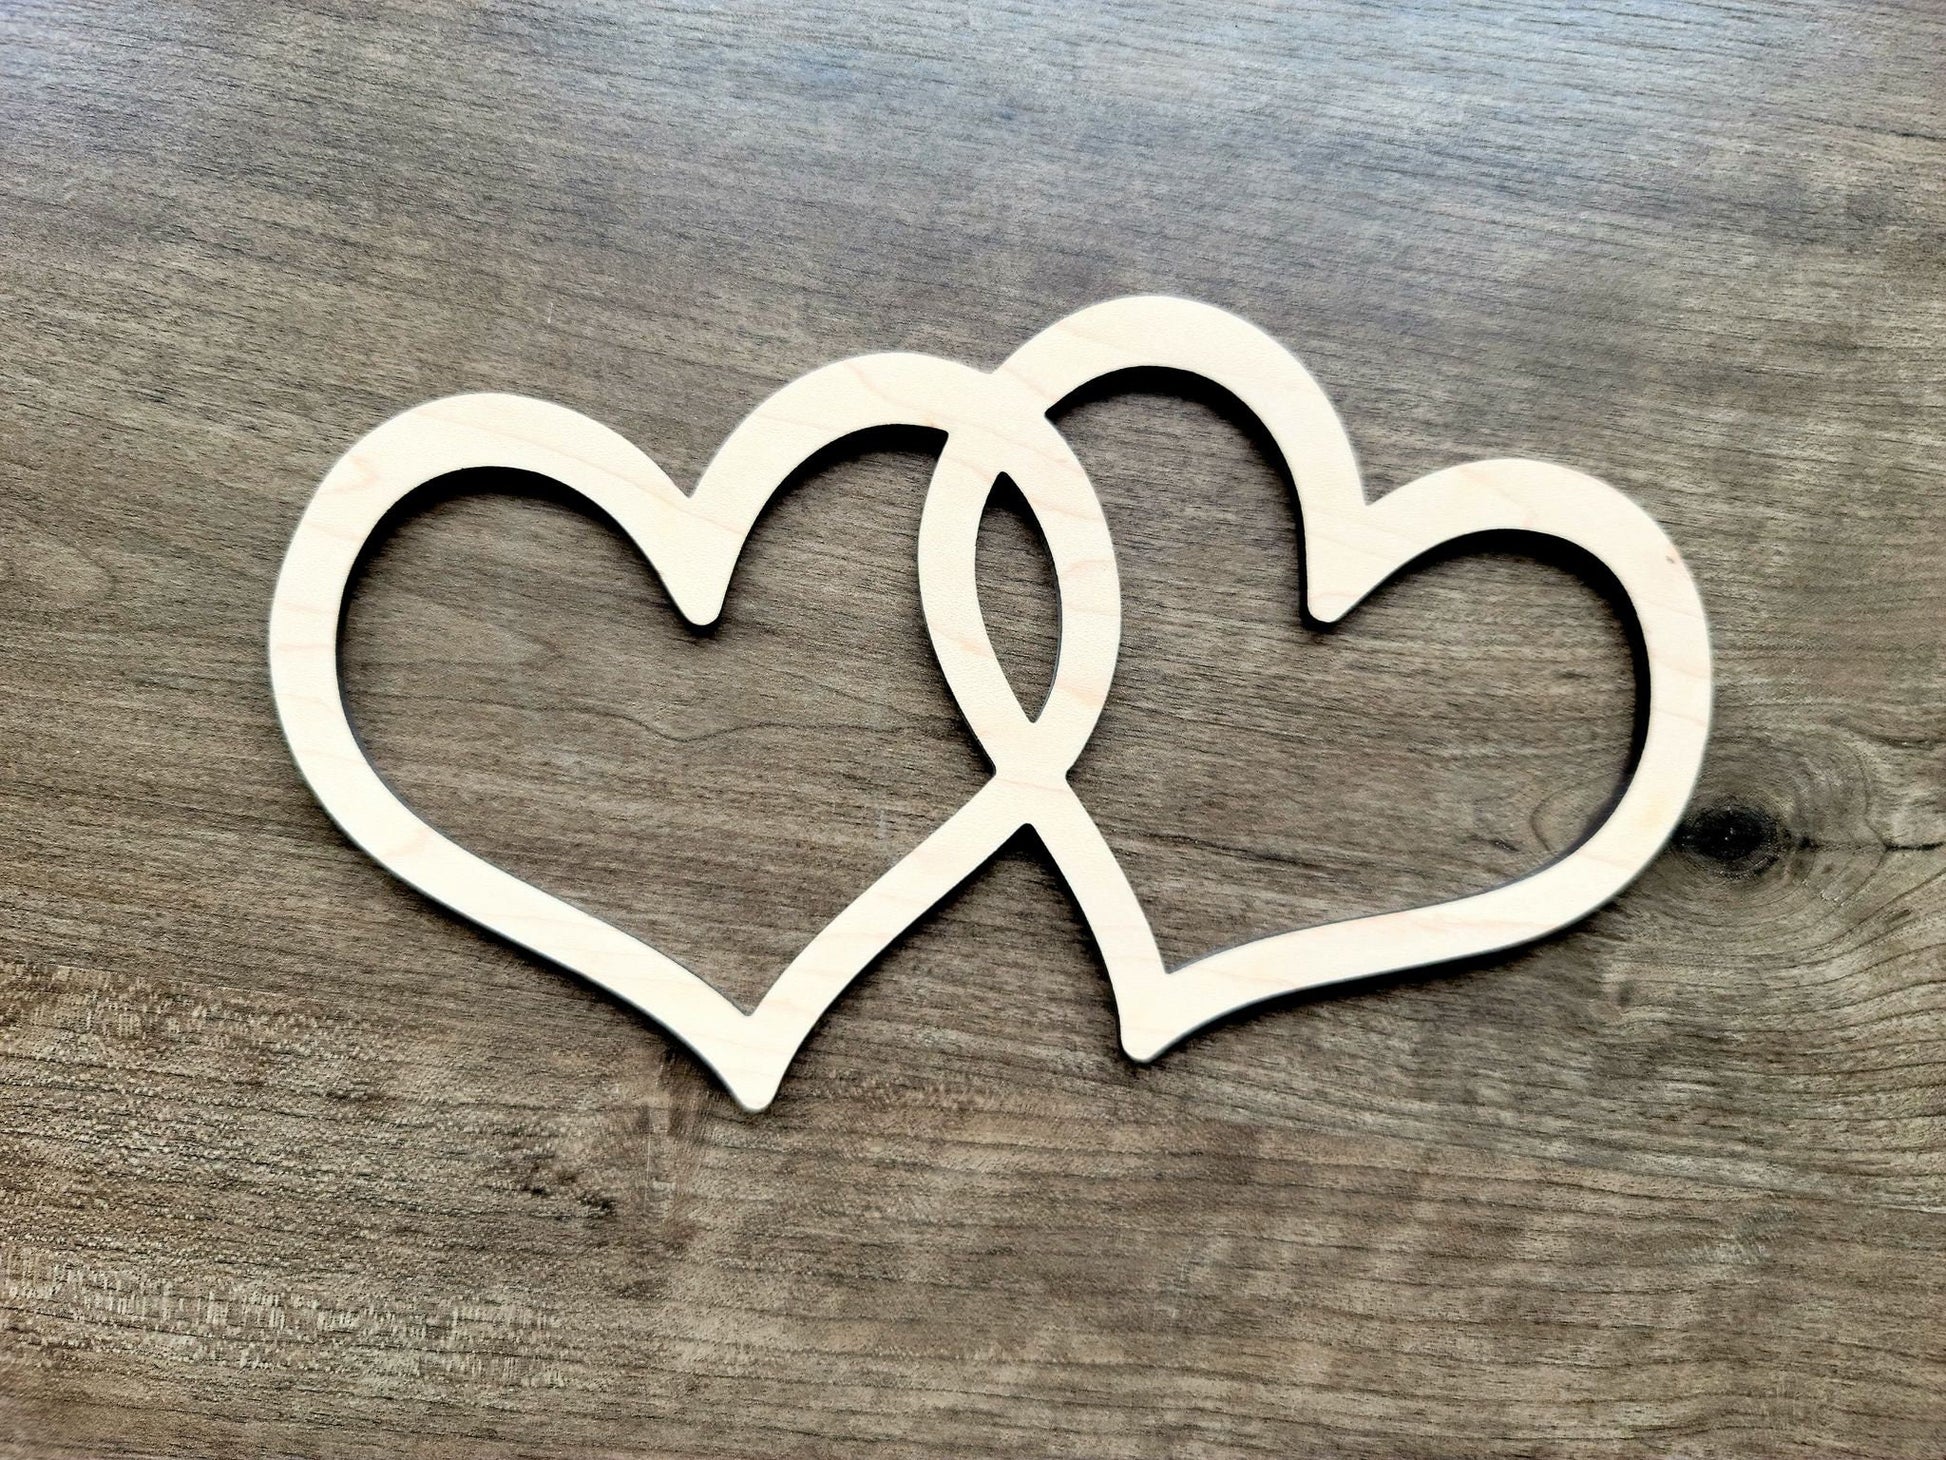 Interlocking Hearts Wood Cut out Shape, Overlapping Hearts, Shapes for –  Kobasic Creations